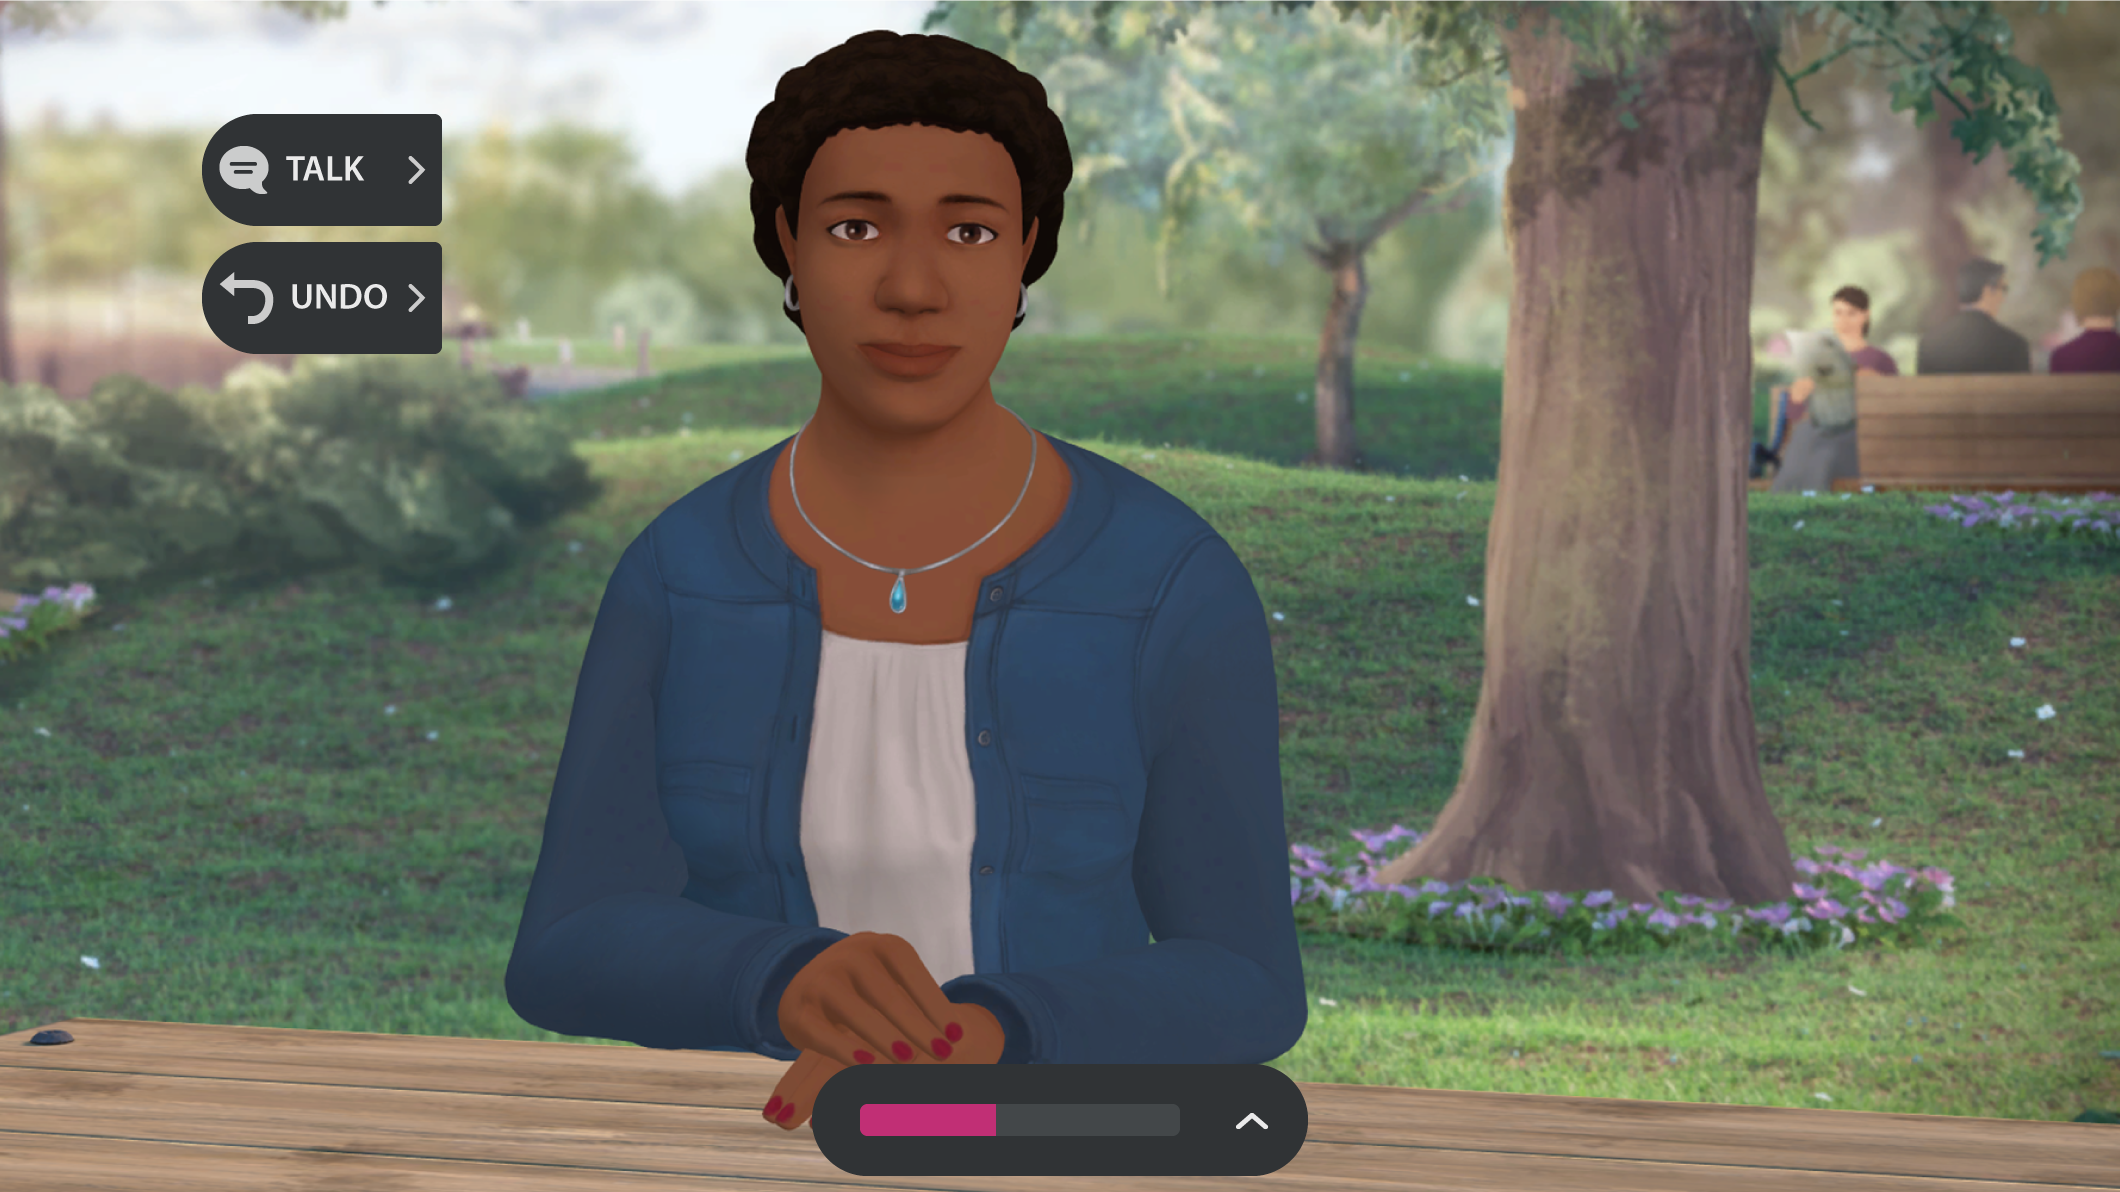 Virtual Humans in New App Help CDC Educate Breast Cancer Patients About Diagnosis & Treatment Options